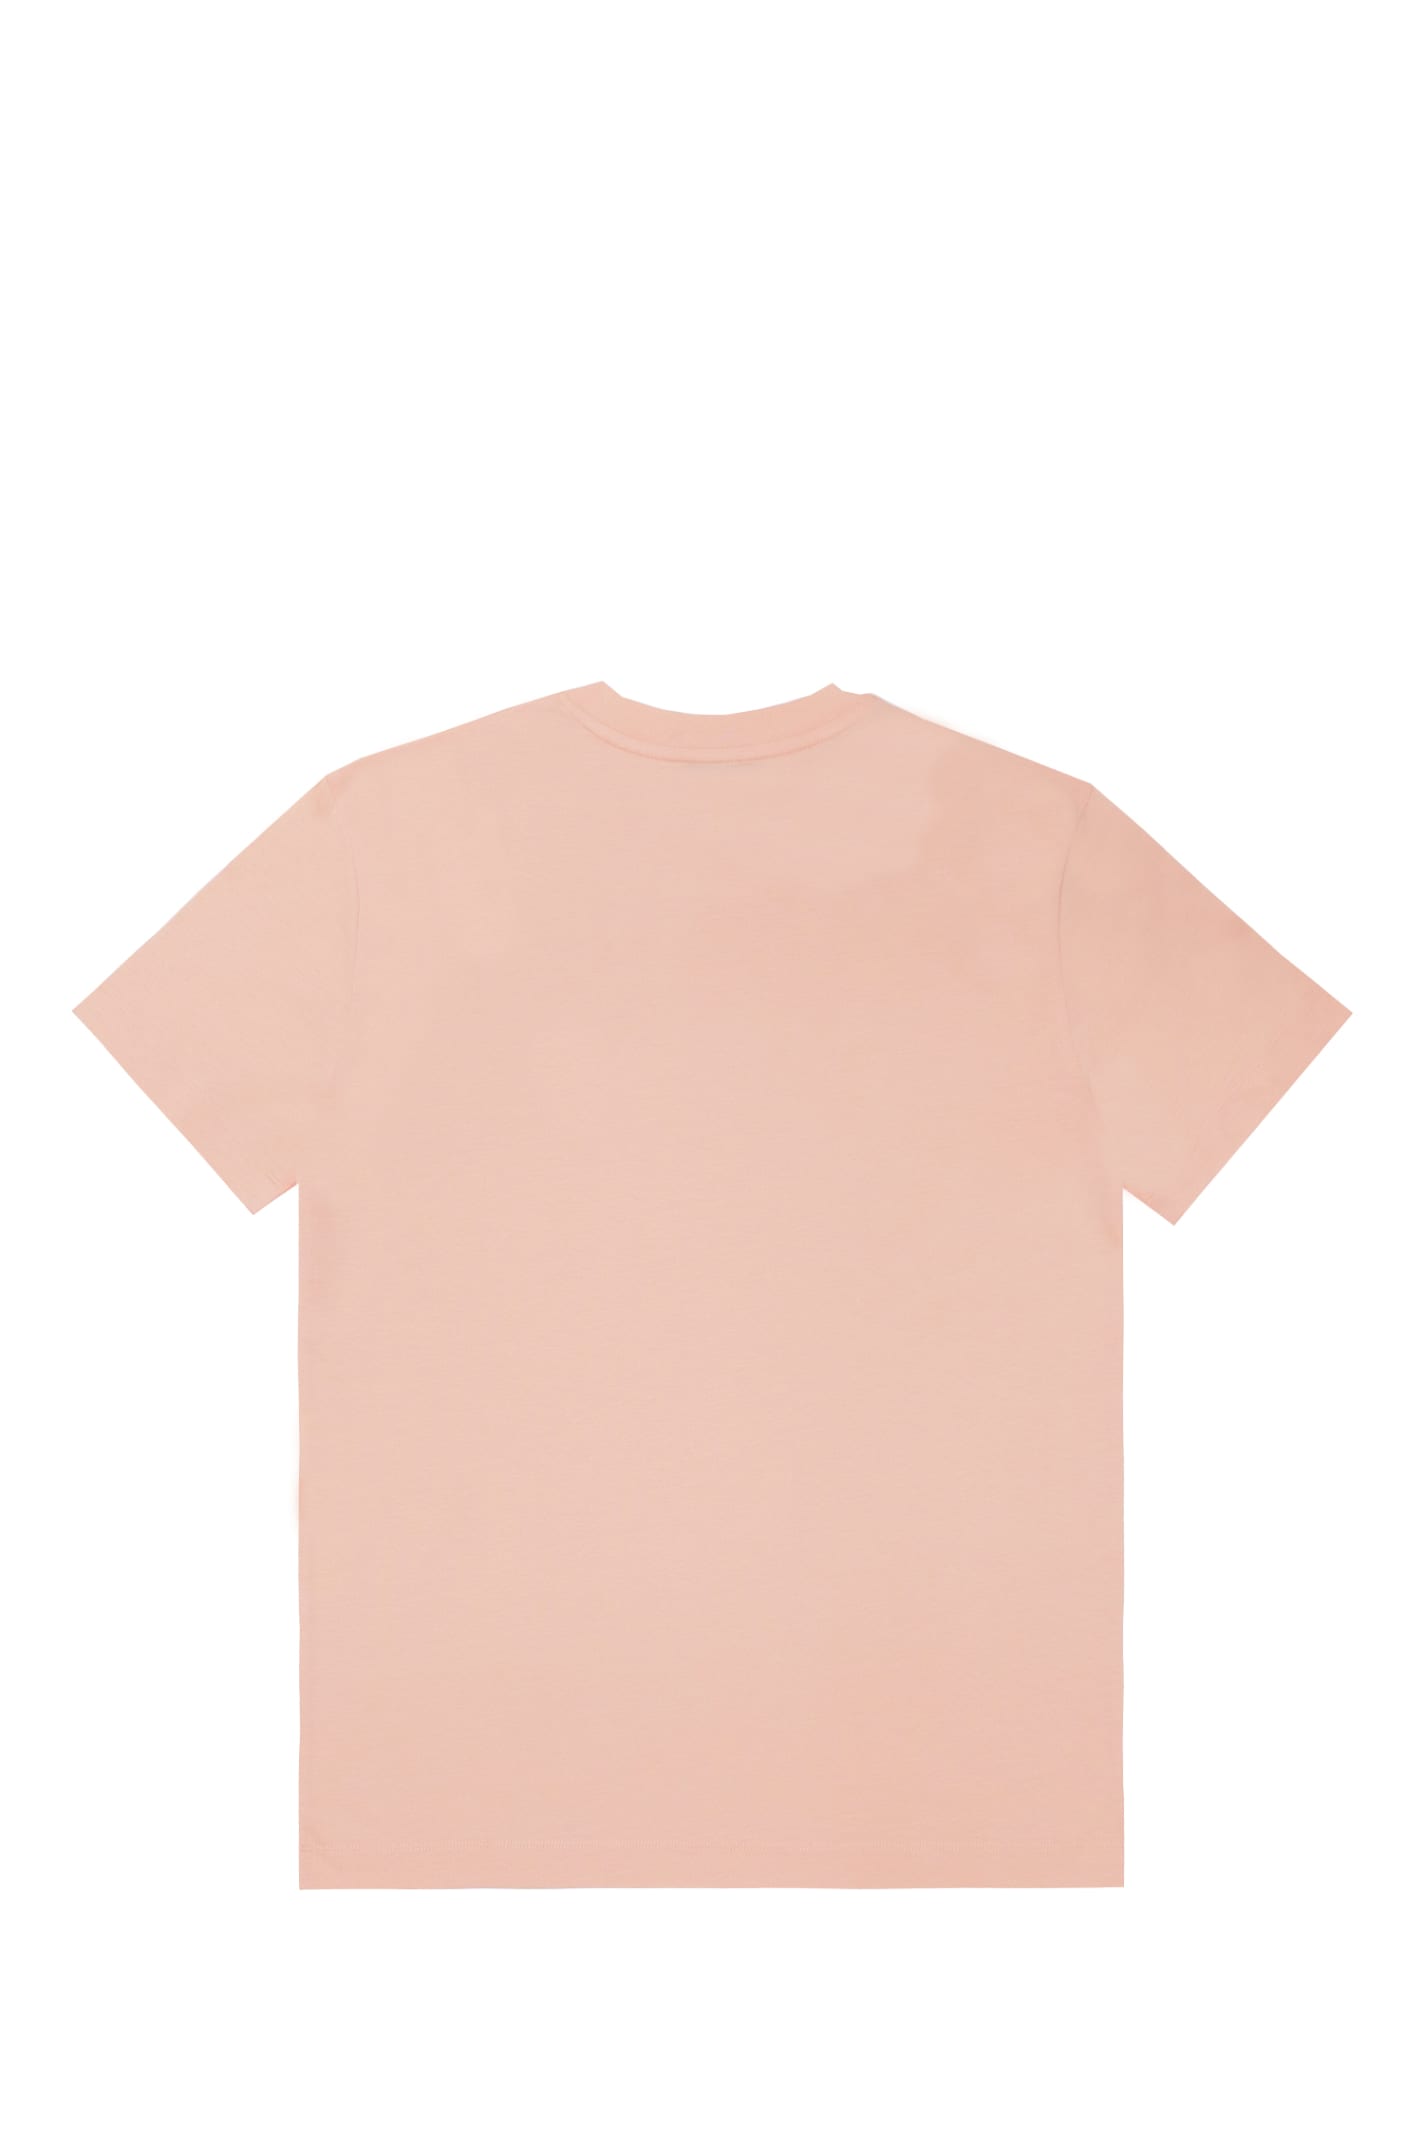 Shop Patou T-shirt In Coral Red